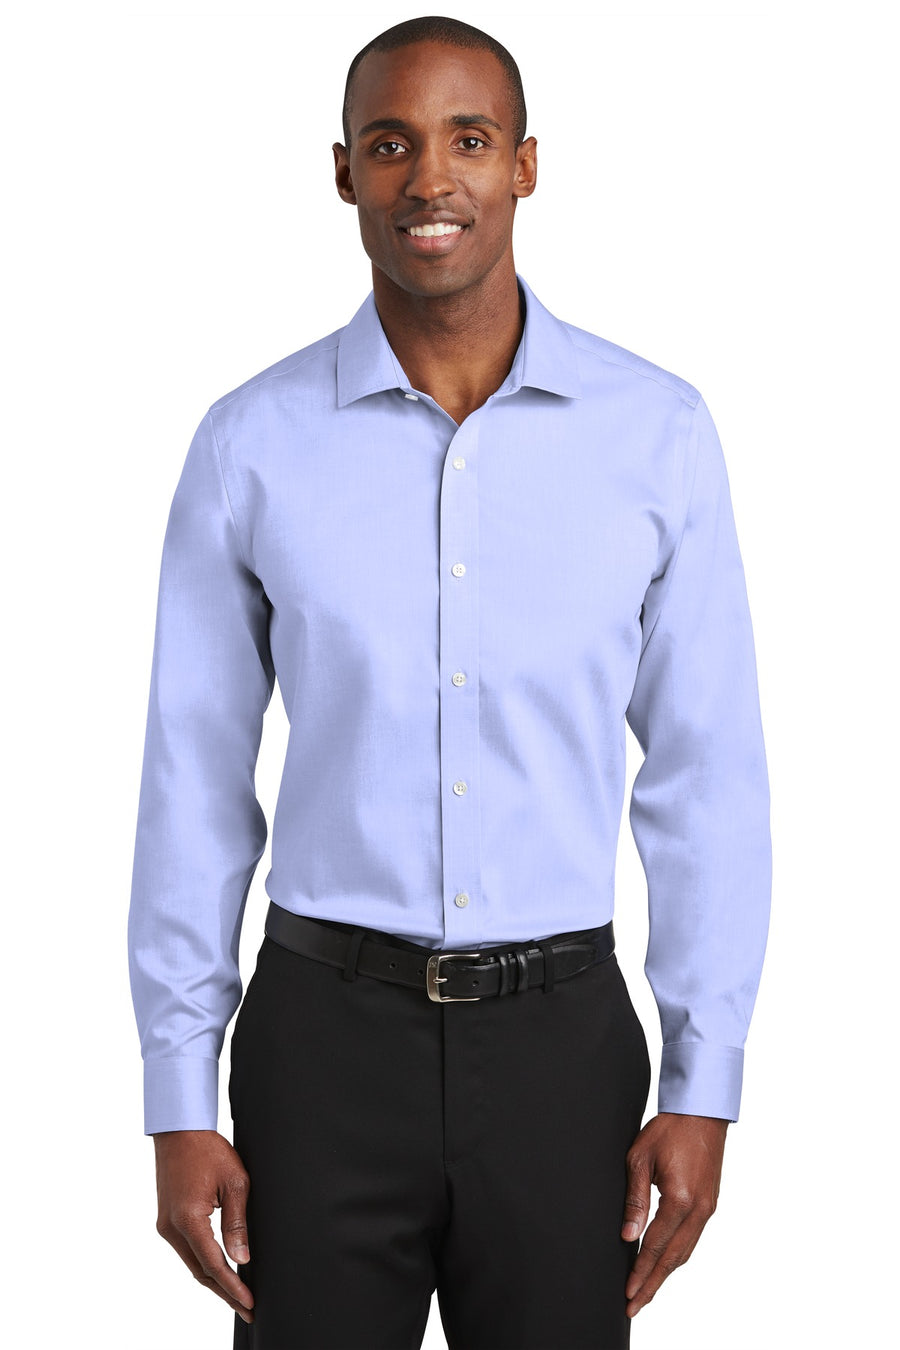 Red House Slim Fit Pinpoint Oxford Non-Iron Shirt.